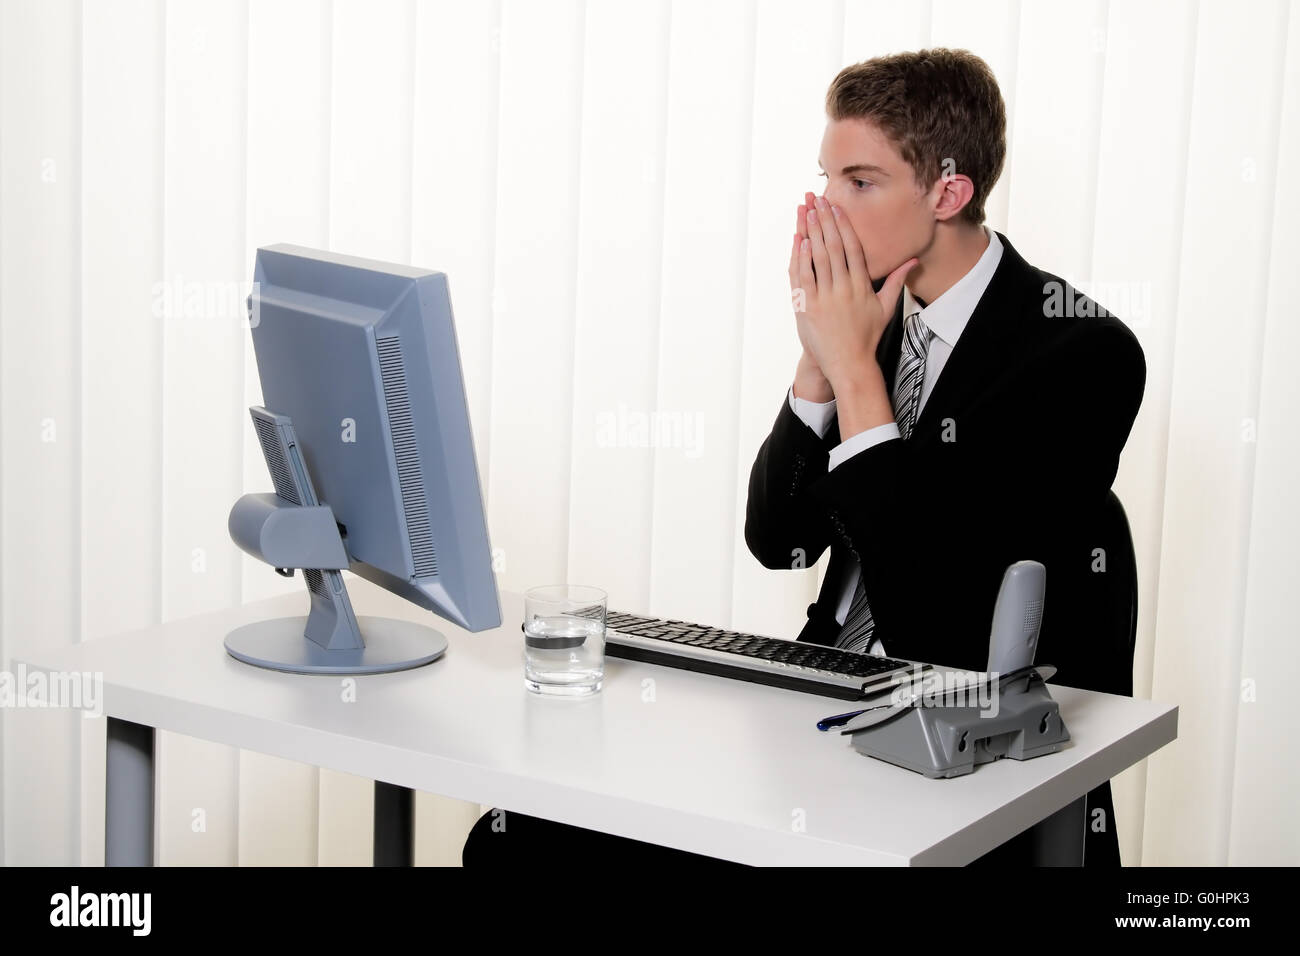 Problems with computer viruses and spam at the office Stock Photo